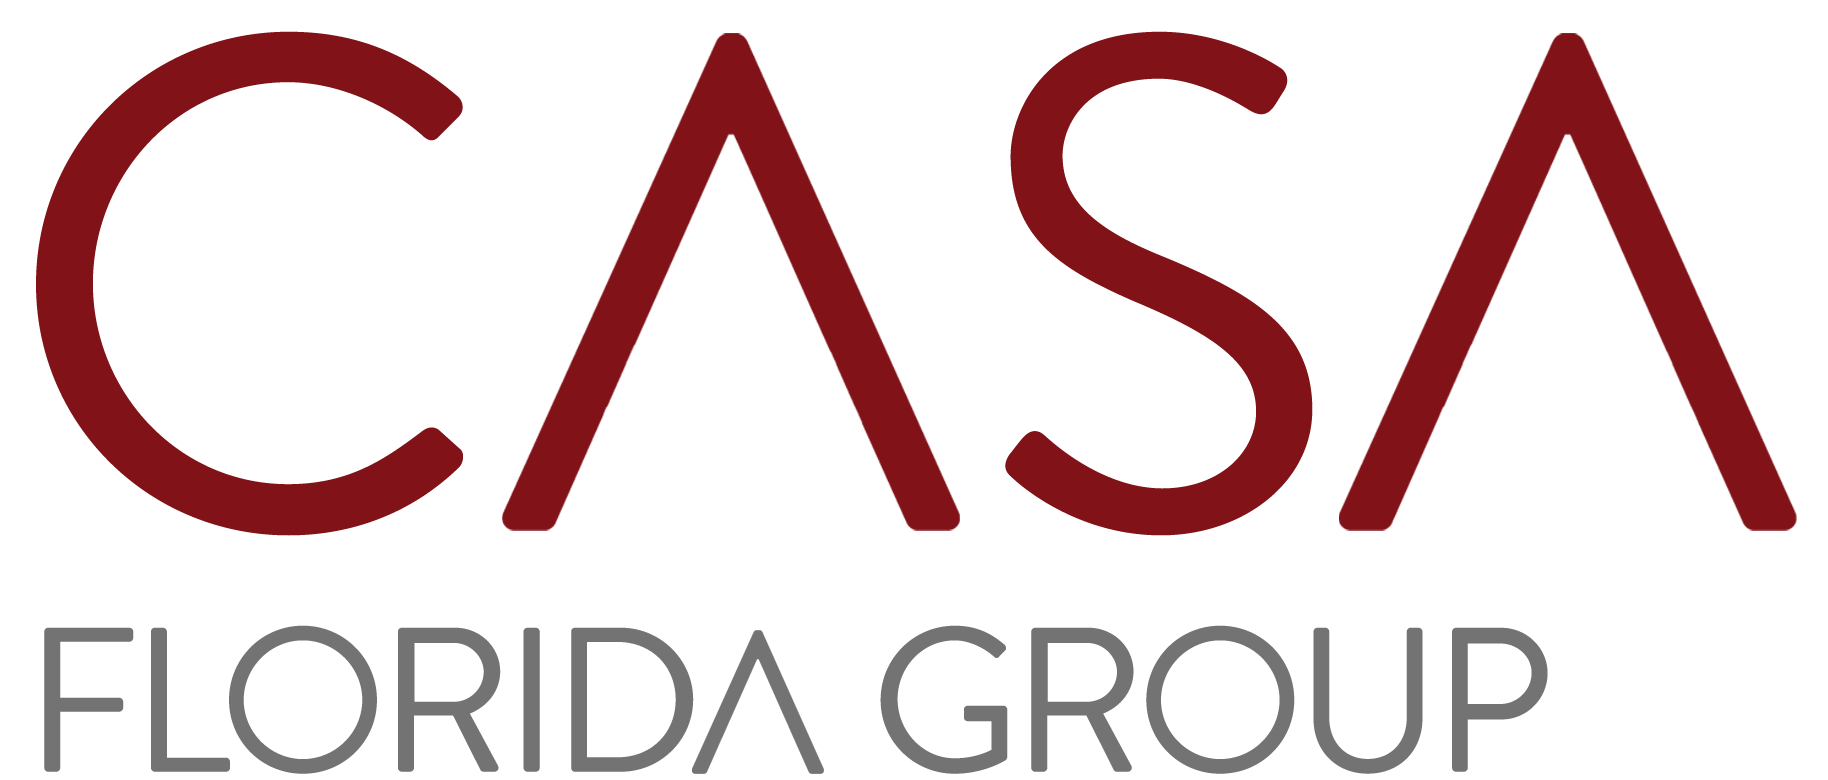 We are your CASA Florida Group